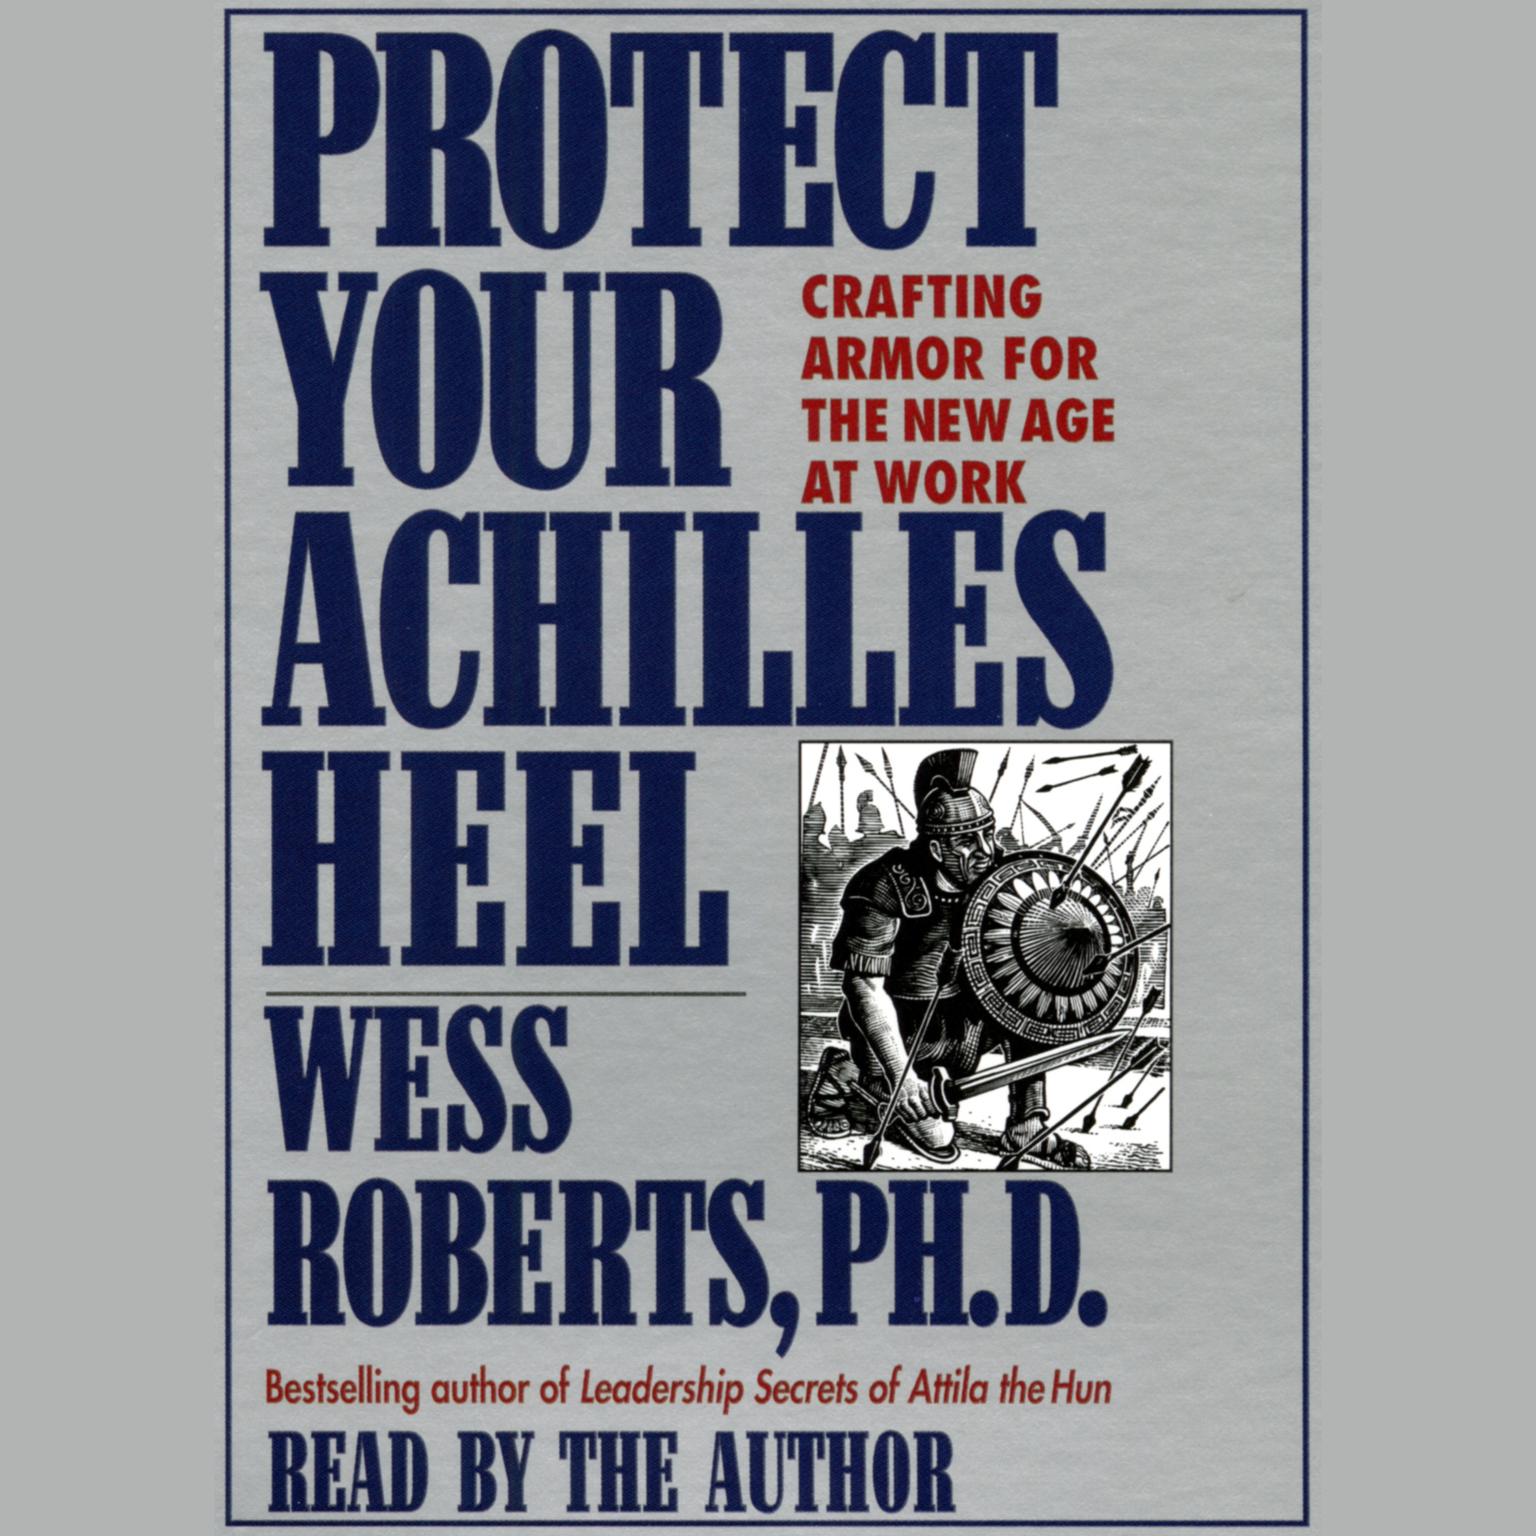 Protect Your Achilles Heel (Abridged): Crafting Armor for the New Age at Work Audiobook, by Wess Roberts